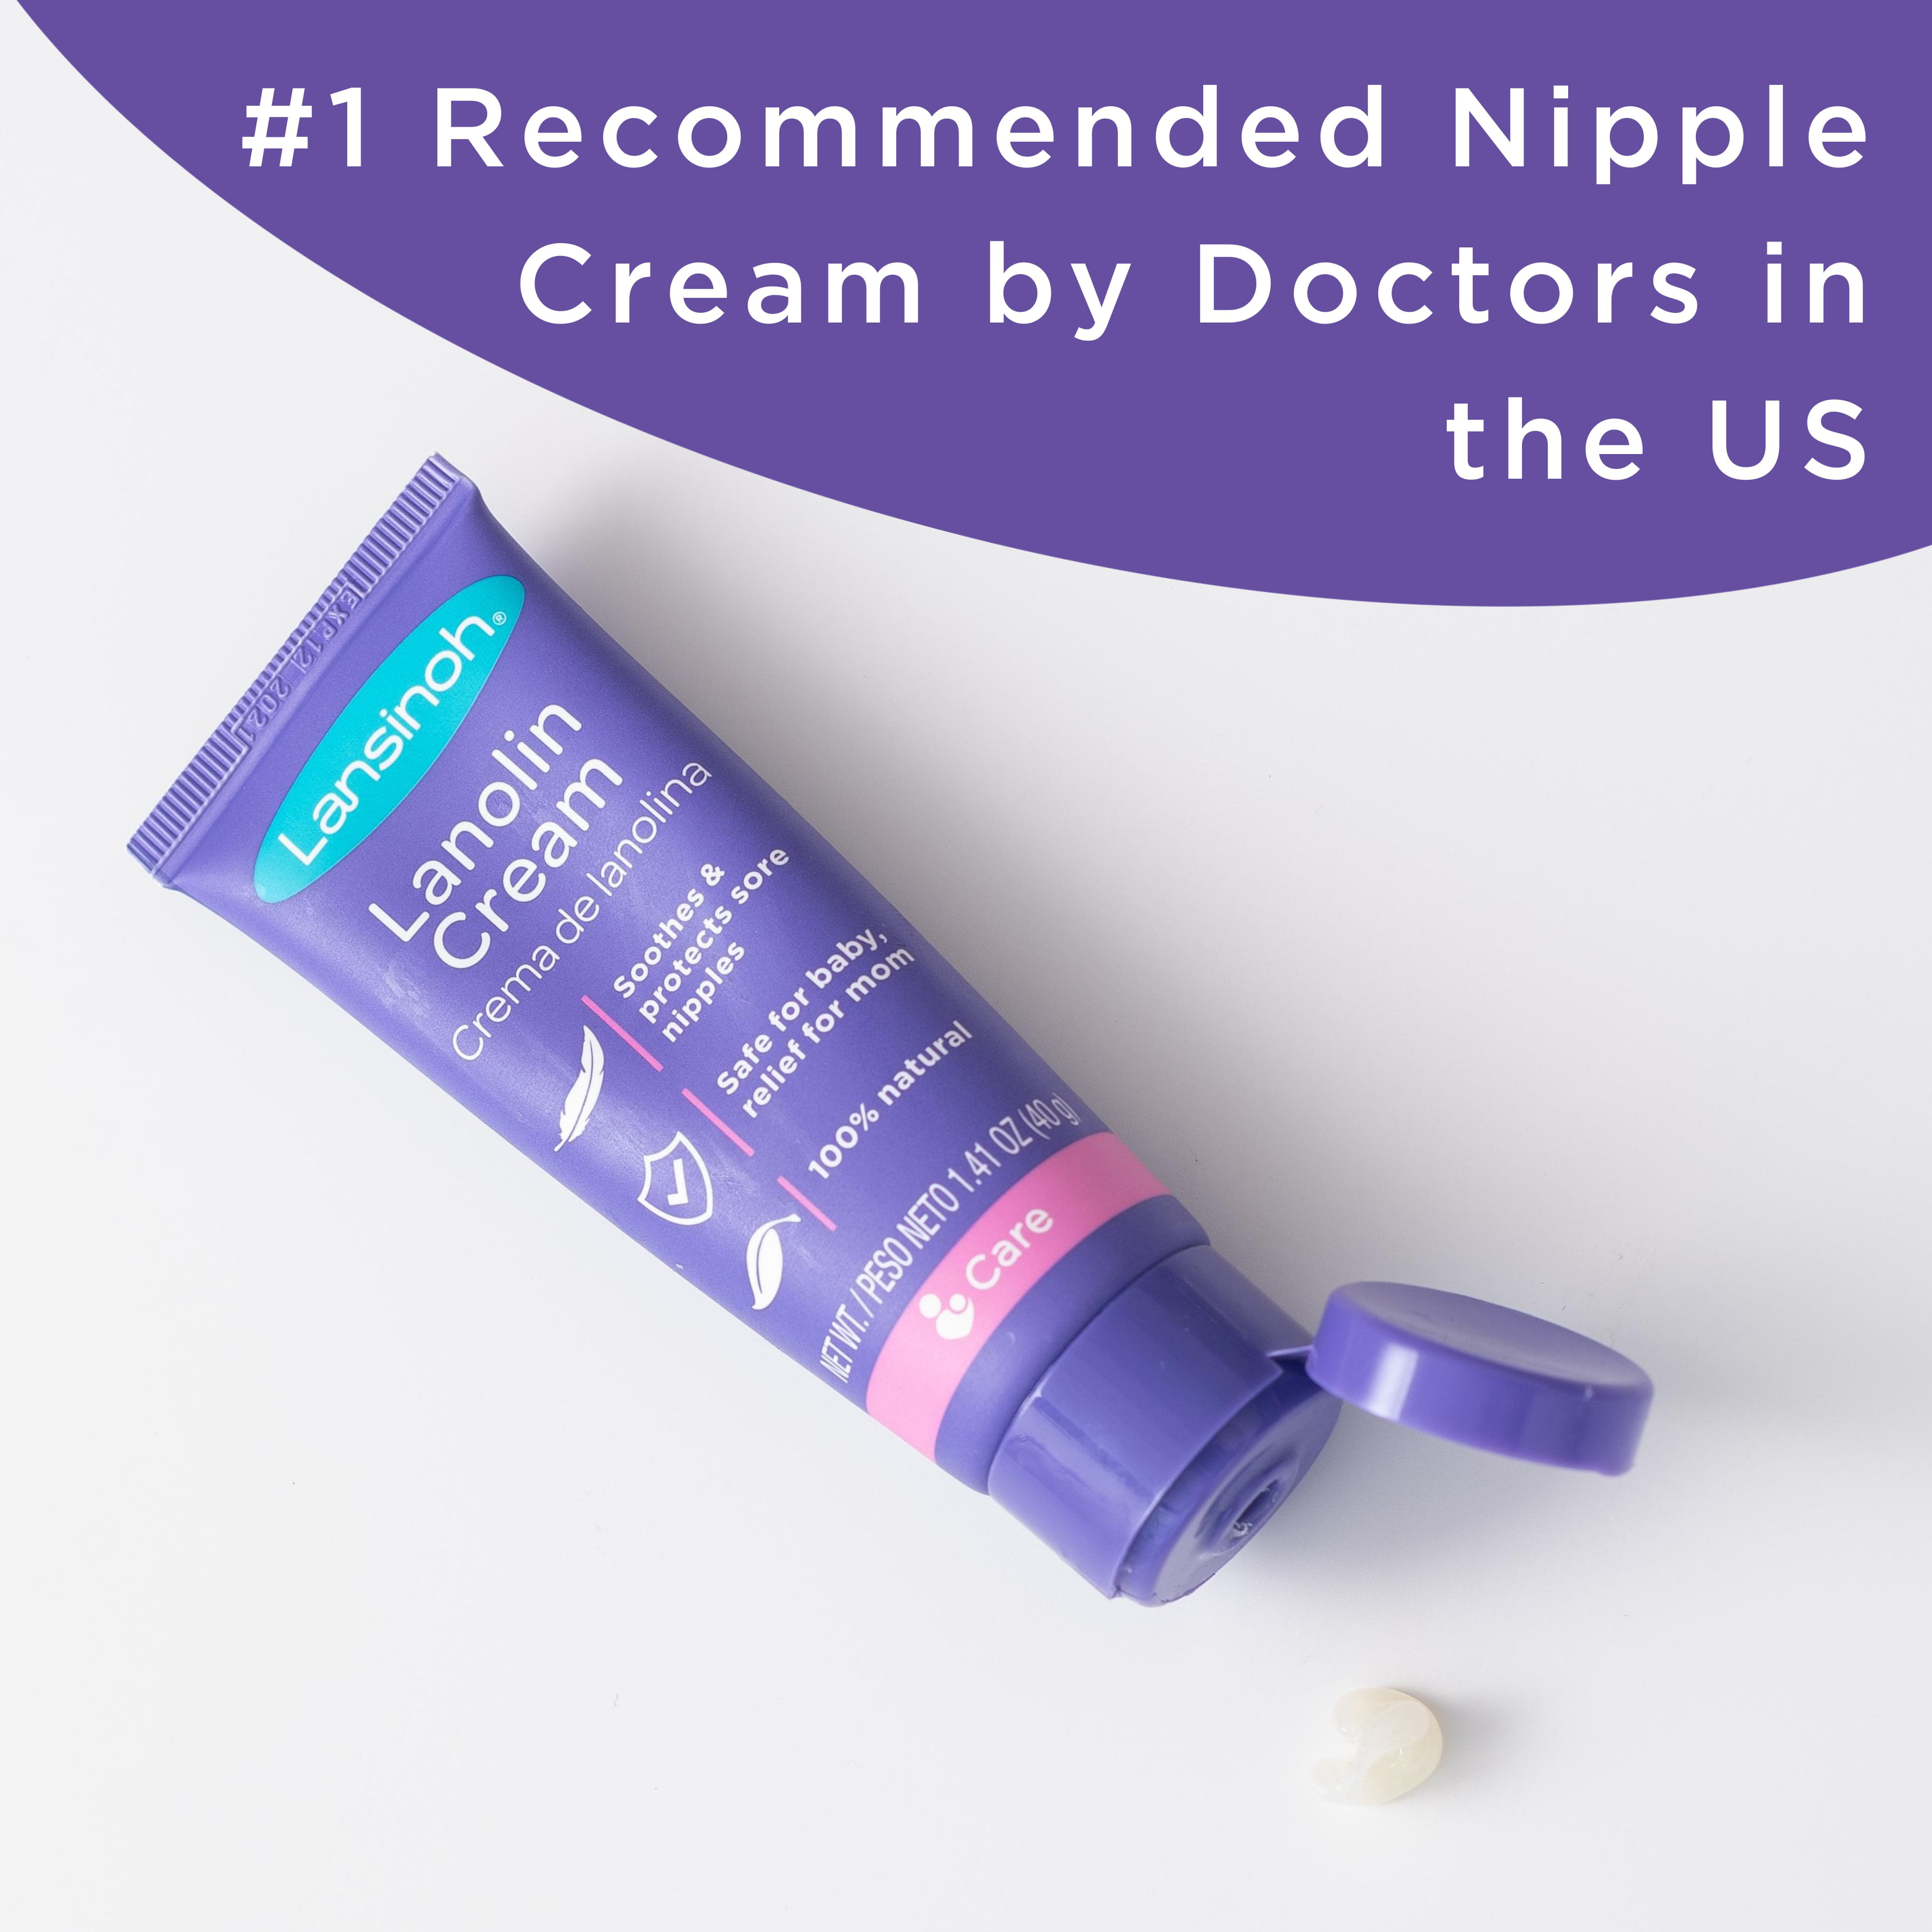 How to Treat Sore Nipples While Breastfeeding – Belly Bandit